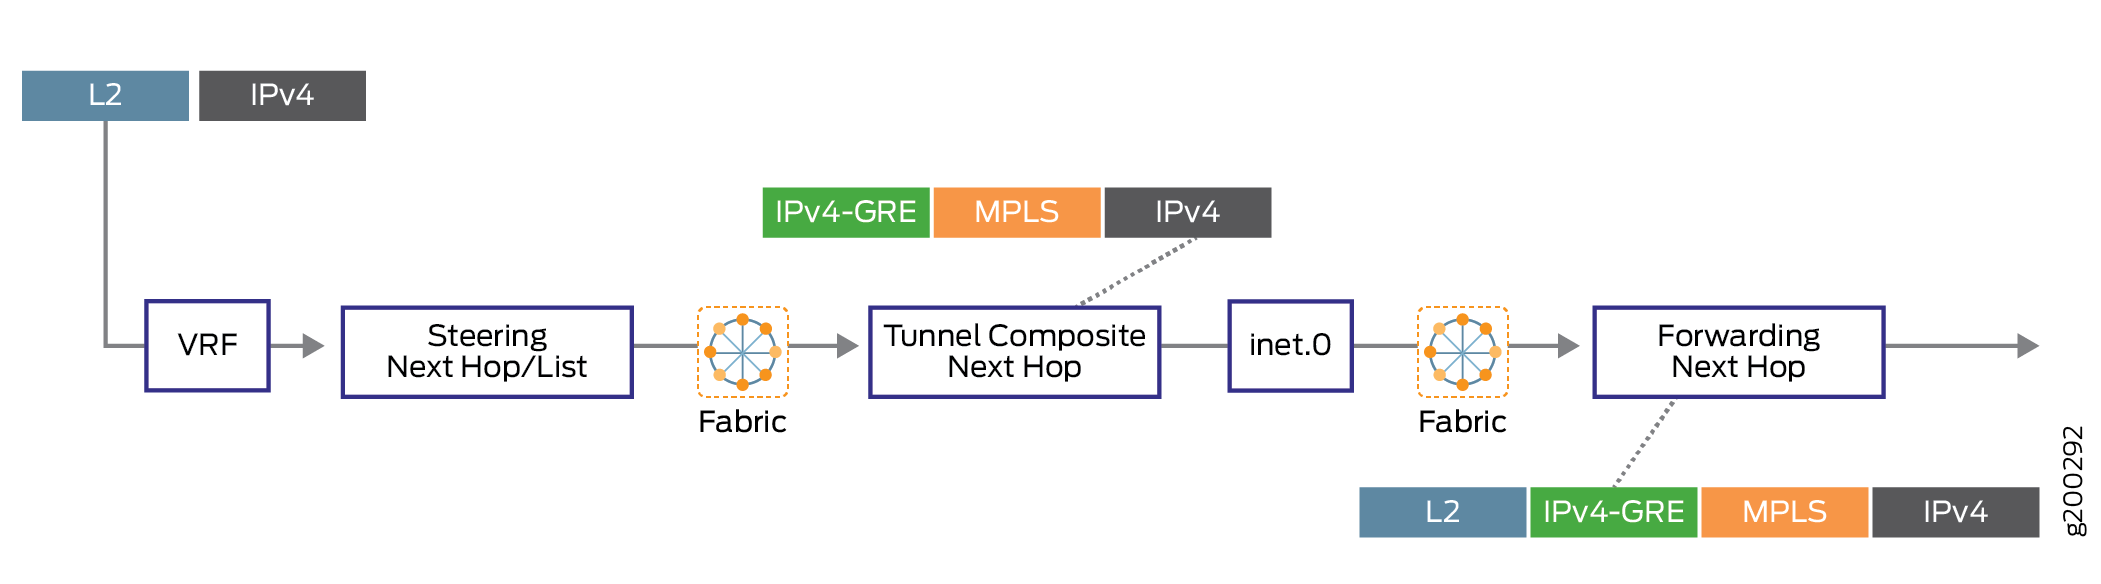 Forwarding Path of Next-Hop-Based Dynamic Tunnels With Localization